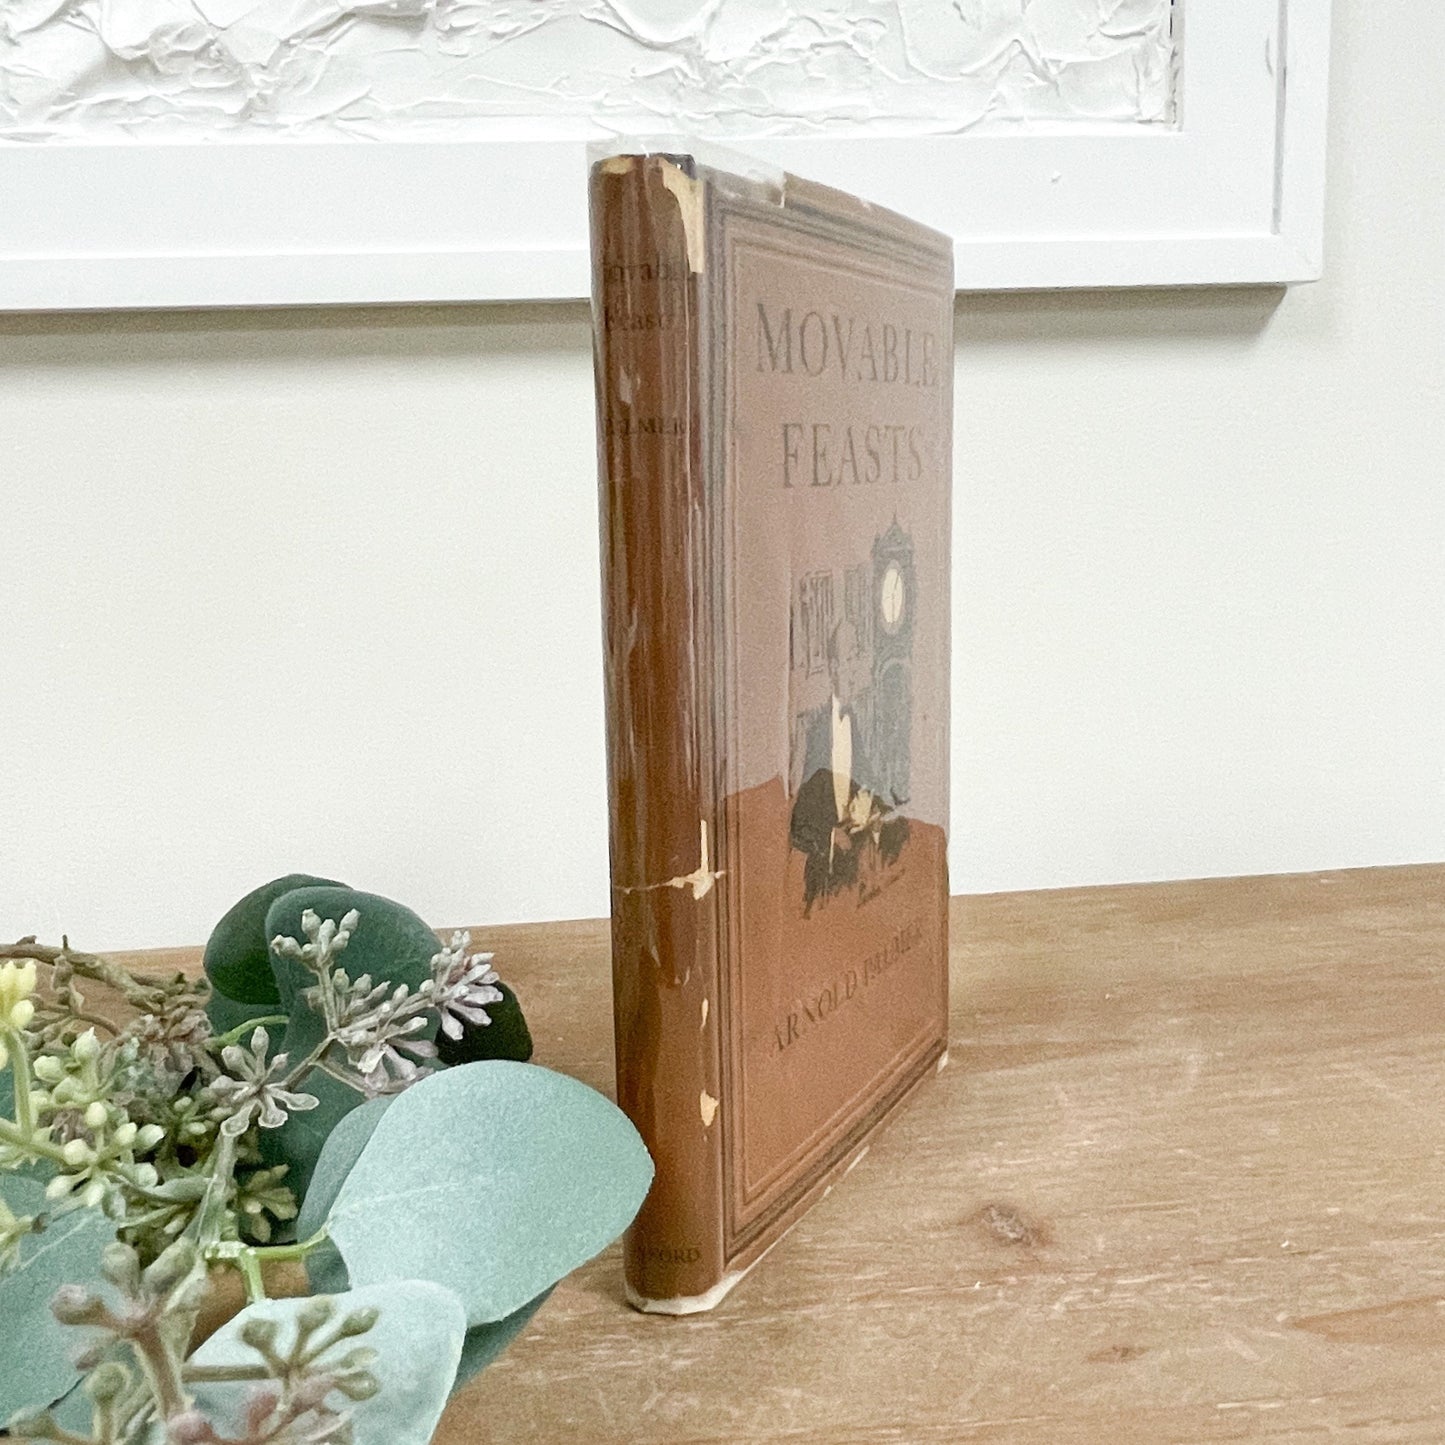 Old Book, Book for Collection, Book for Decor, Movable Feasts by Arnold Palmer